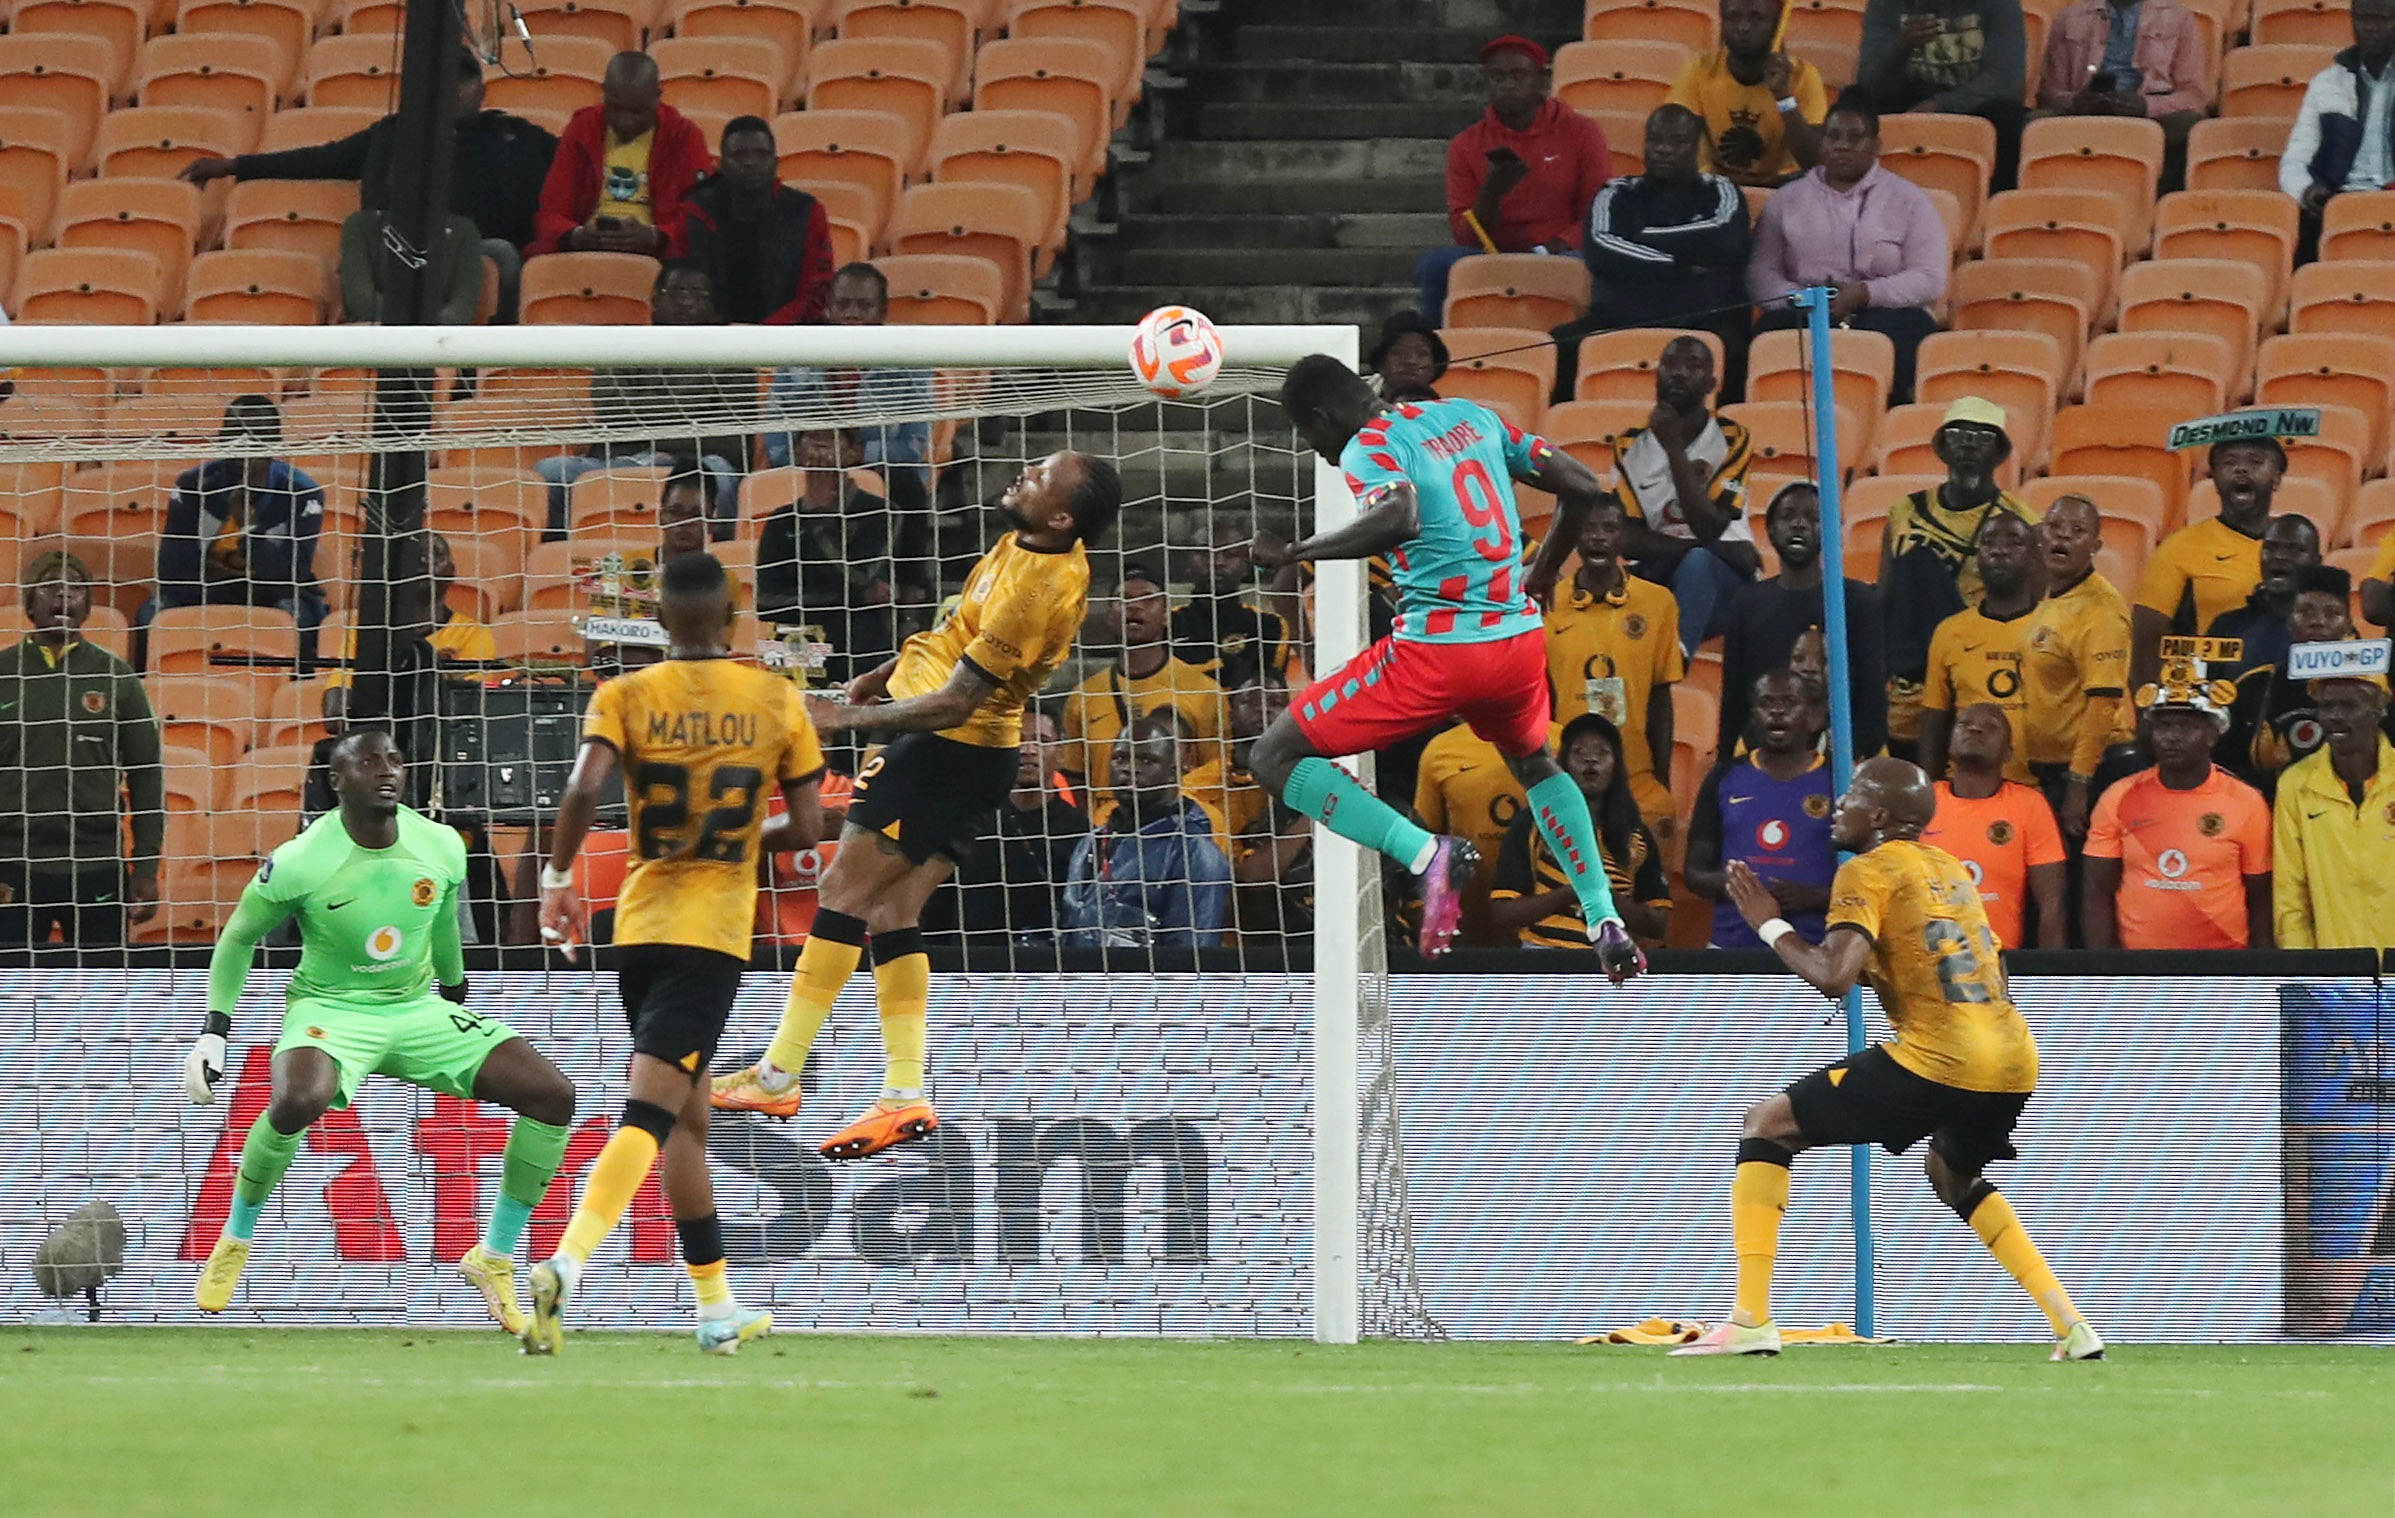 'Chiefs are not vulnerable from set-piece situations'